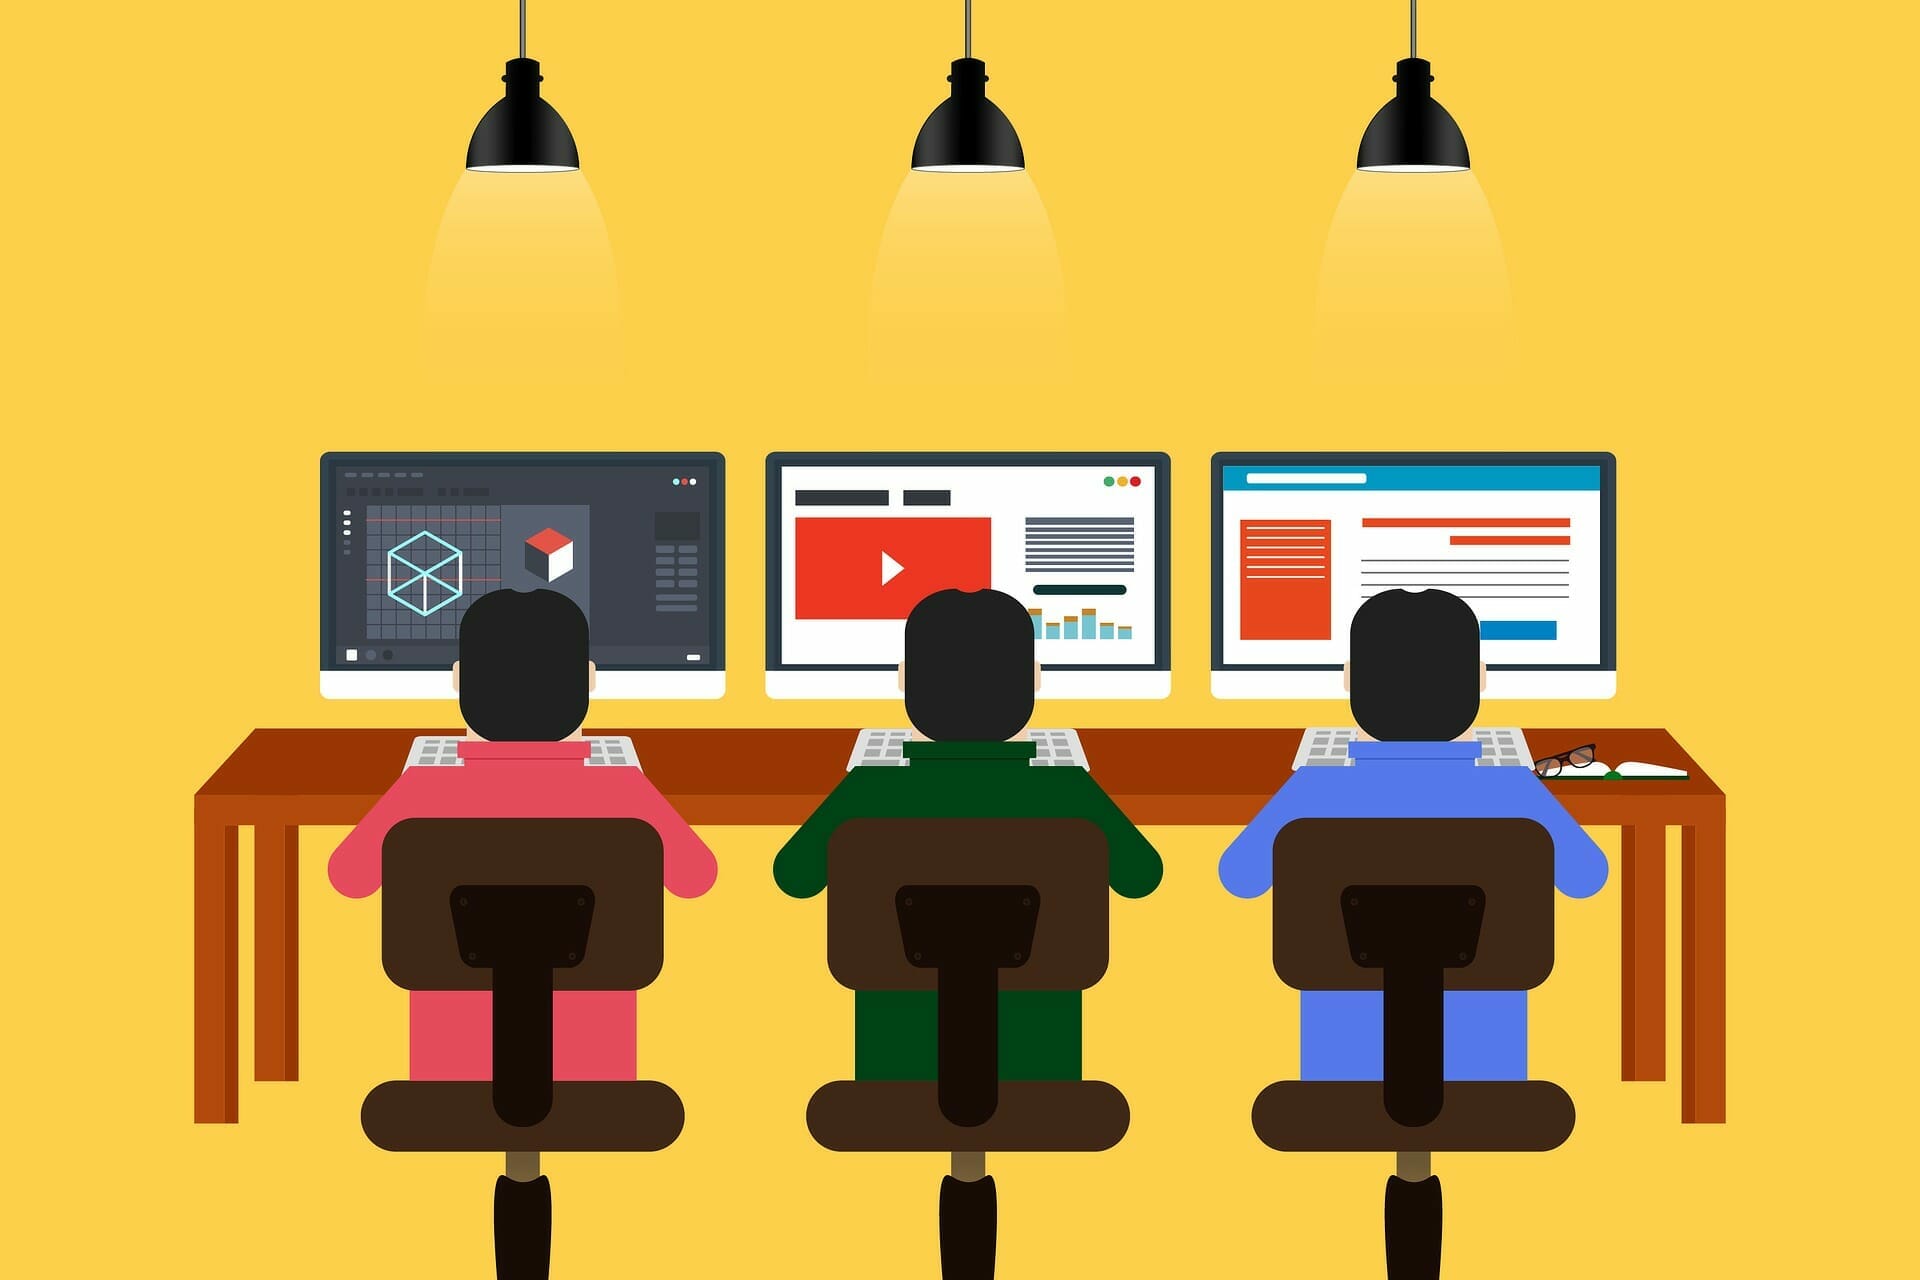 Vector image of three programmers working together